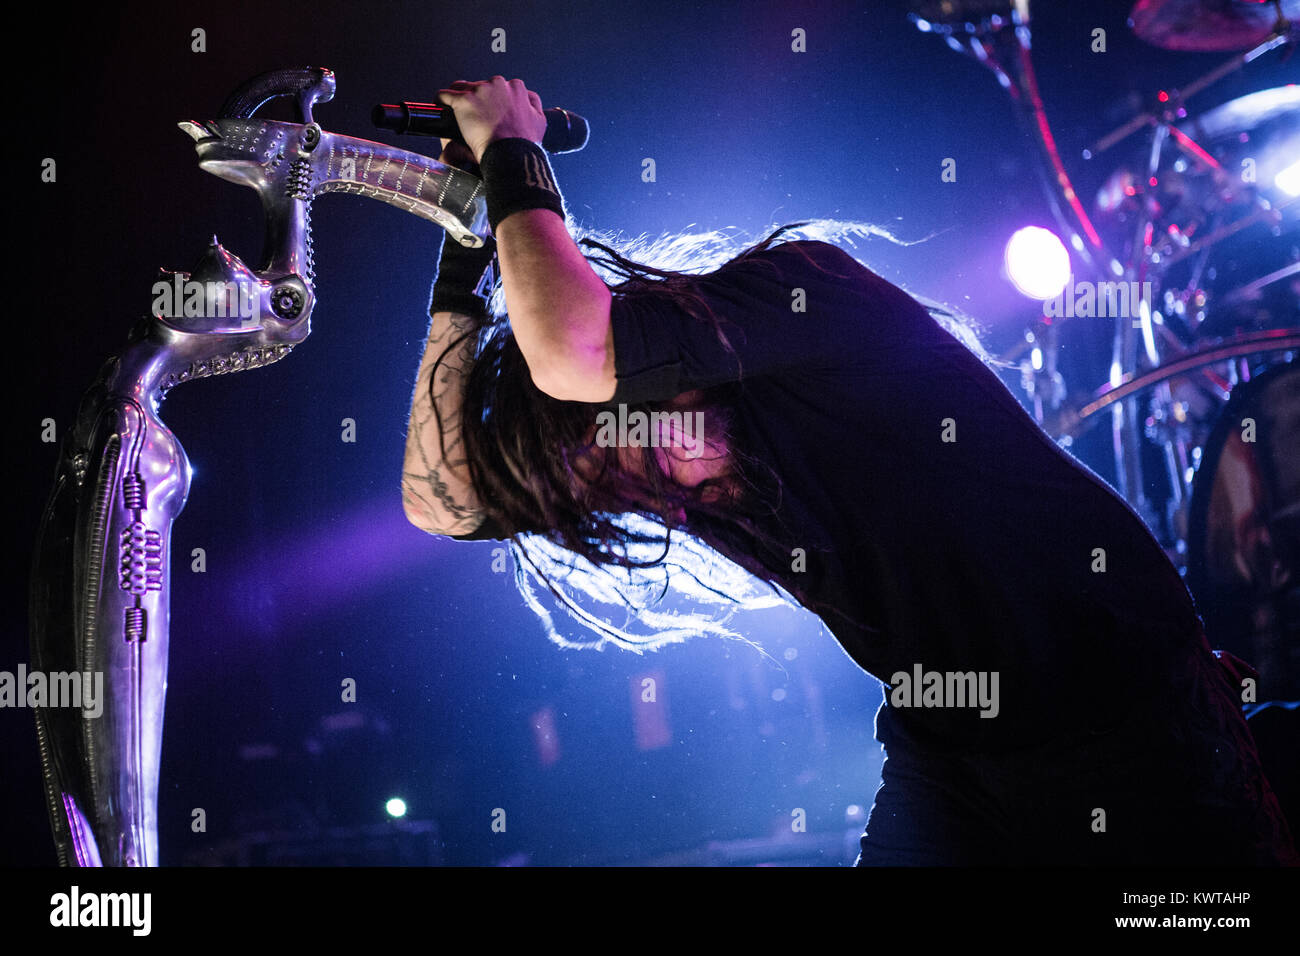 The American heavy metal band Korn (stylized KoЯn) performs a live concert at Amager Bio in Copenhagen. In the picture: lead singer Jonathan Davis. Denmark 08/05 2014. Stock Photo